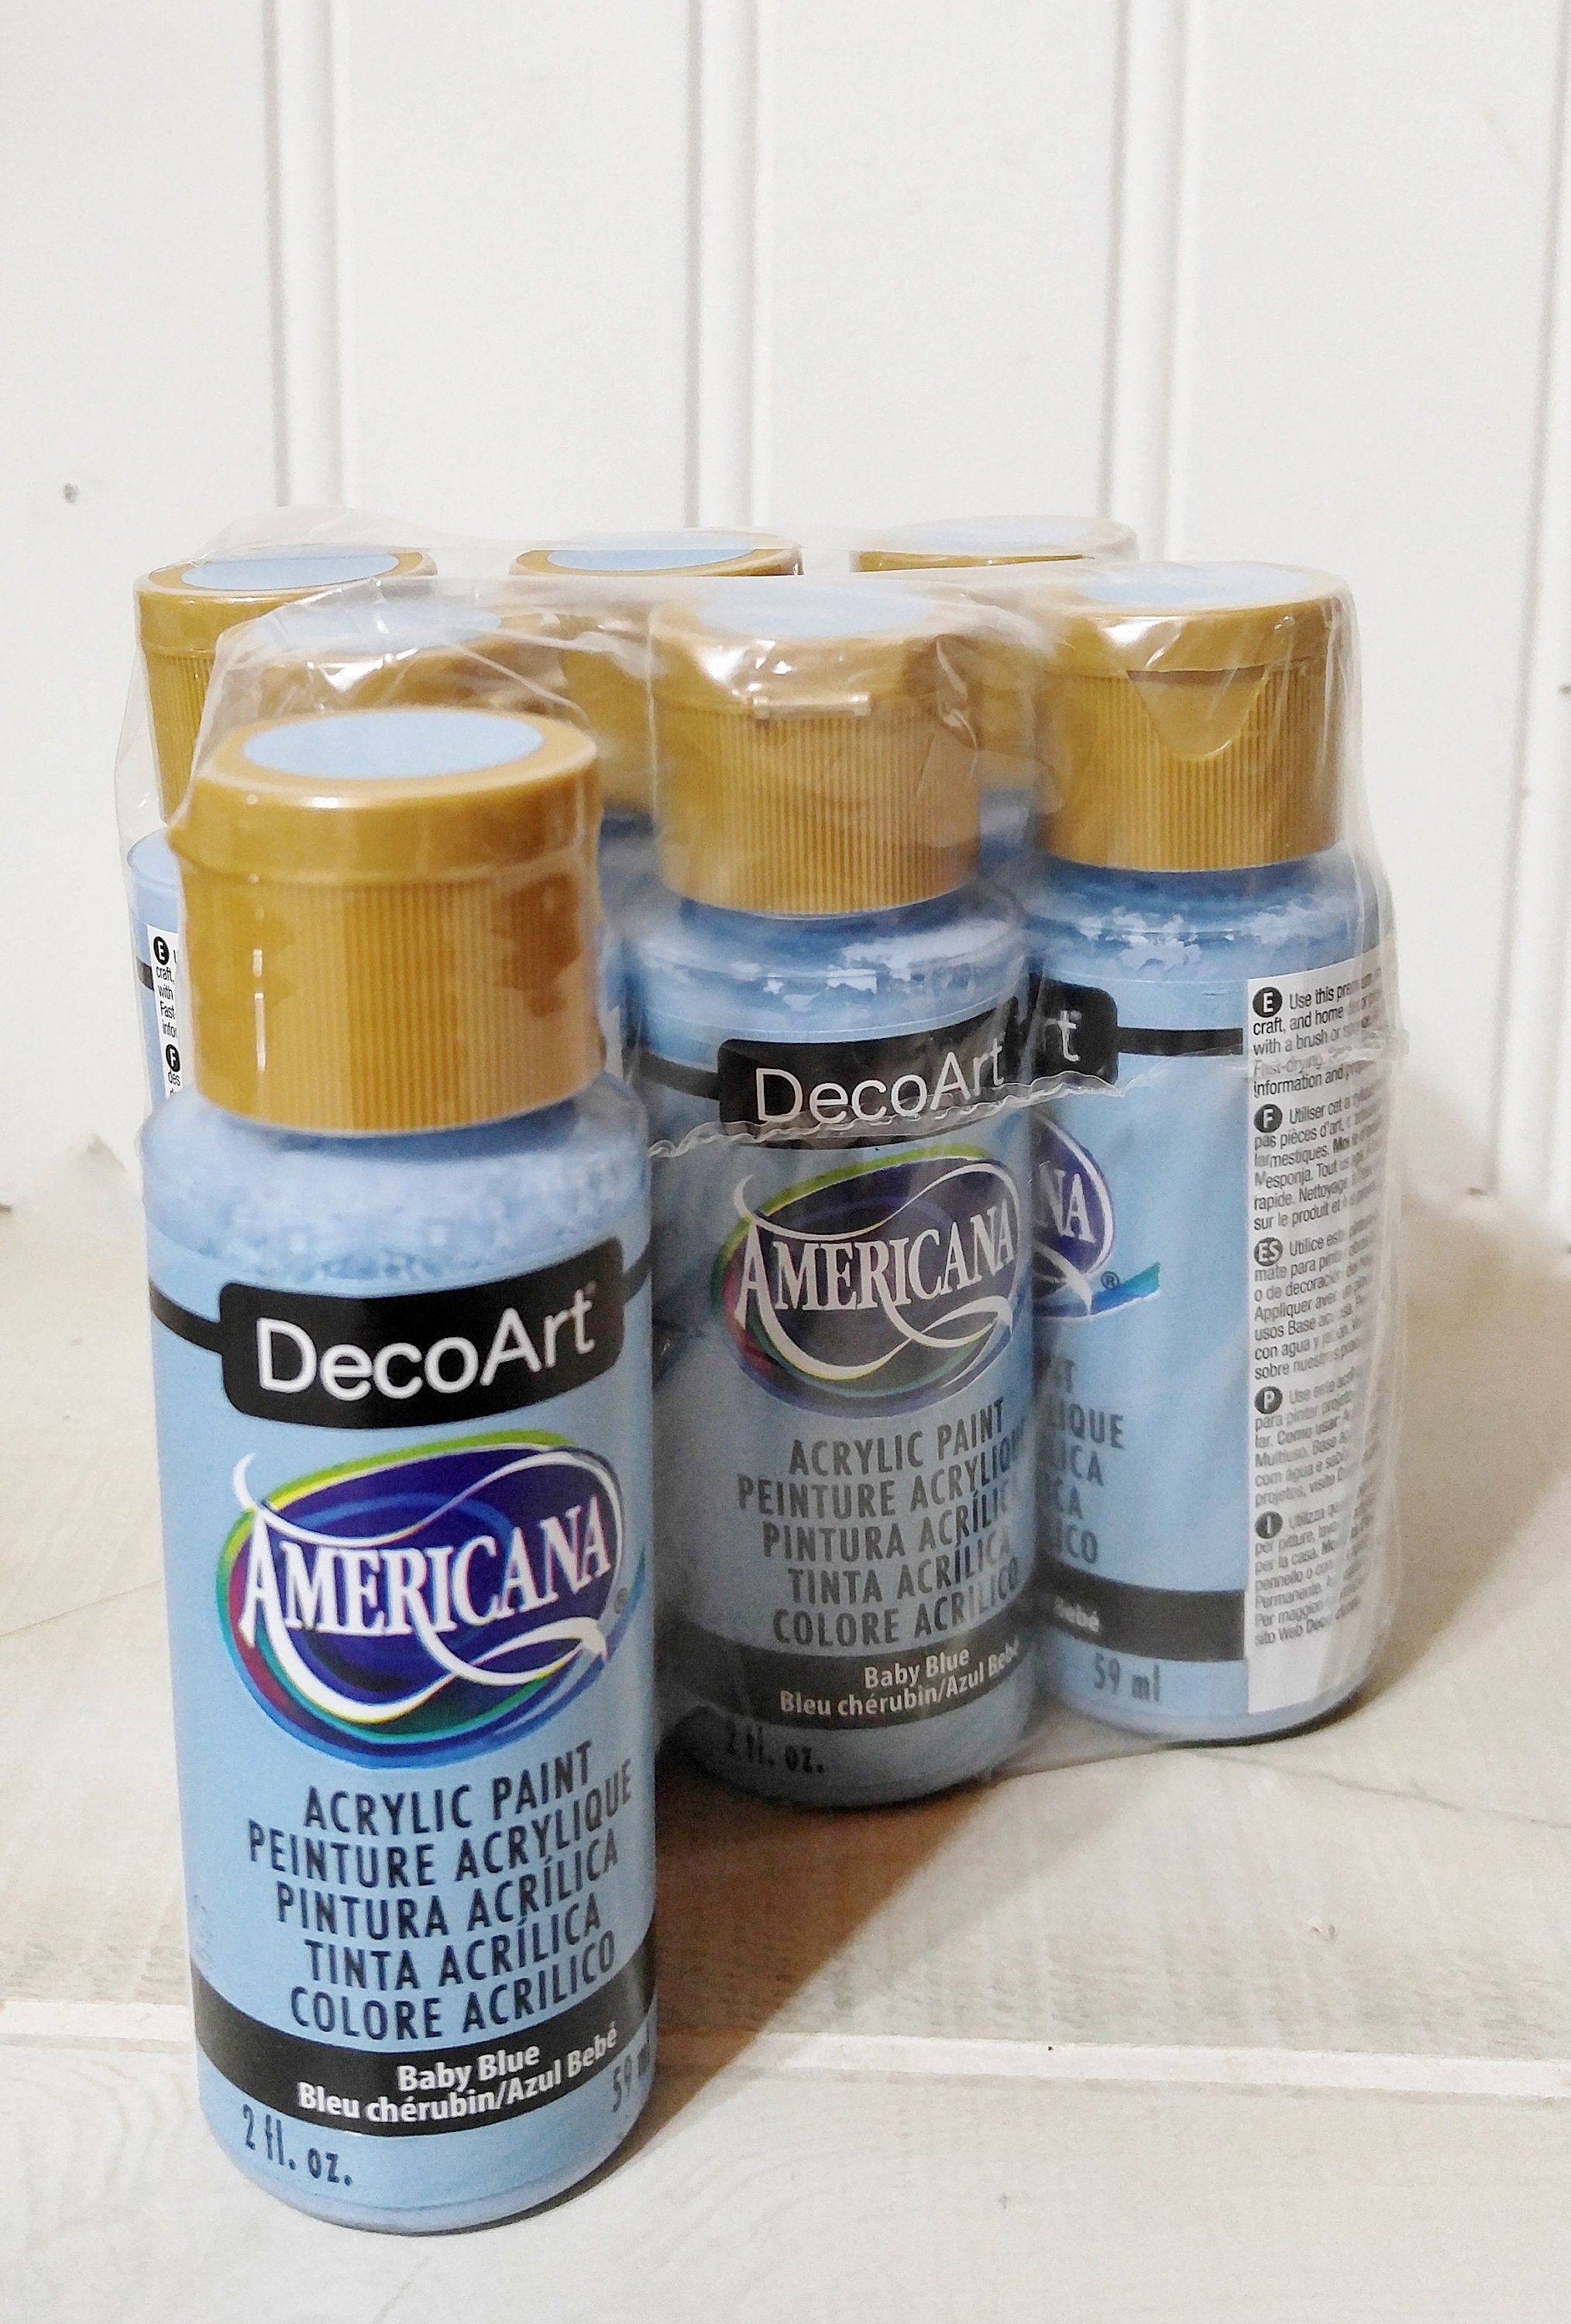 Two 2 Decoart Americana Acrylic Craft Paint in 2 Oz Bottles. Ideal for  Miniature Projects. Save on Two Bottles in Popular Color Choices. 